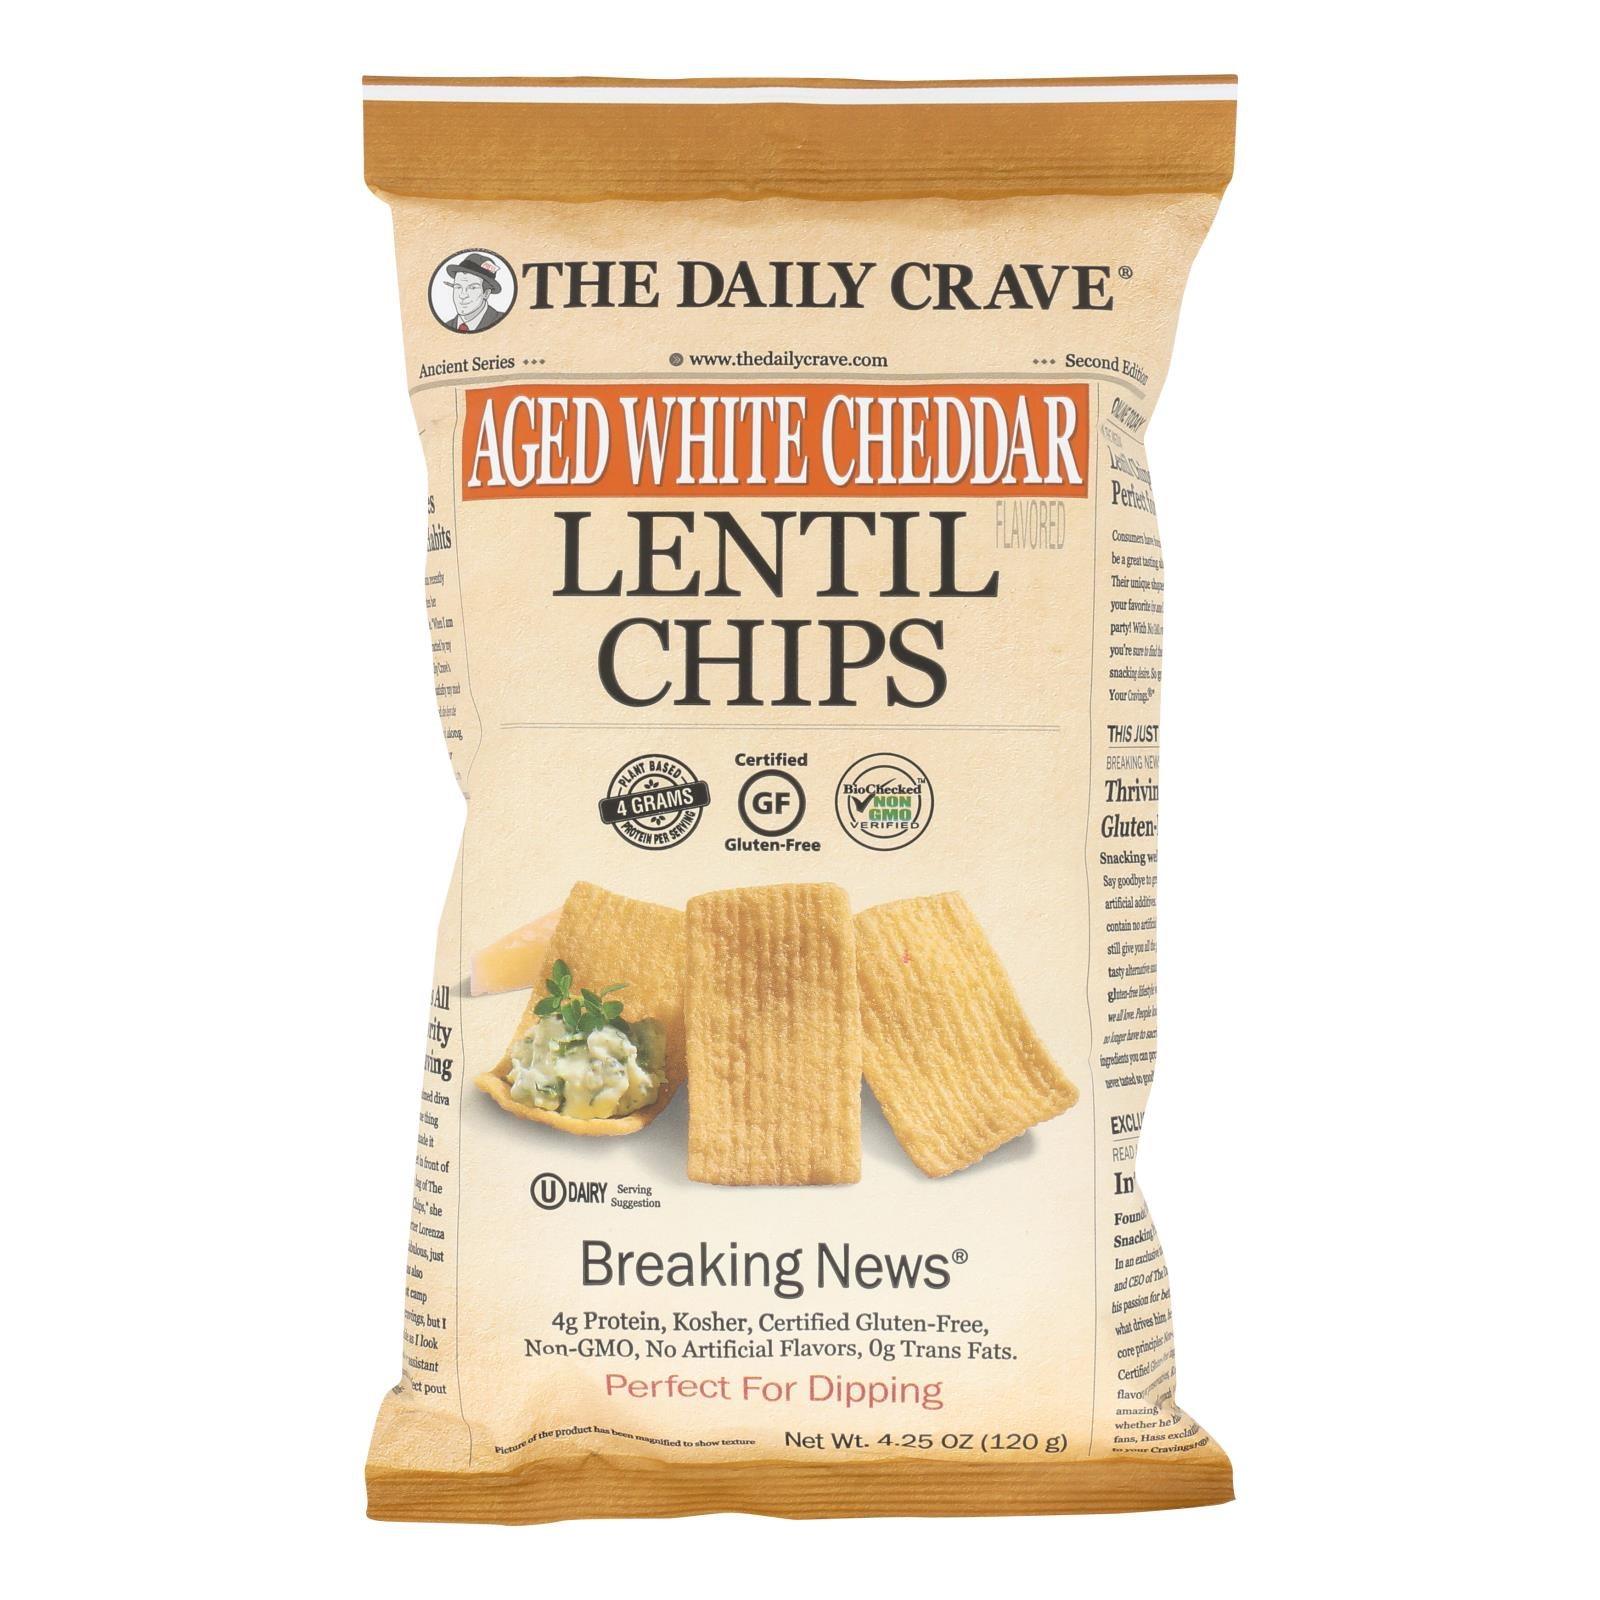 The Daily Crave - Lentil Chip Aged Wht Chd - Case Of 8 - 4.25 Oz - Loomini